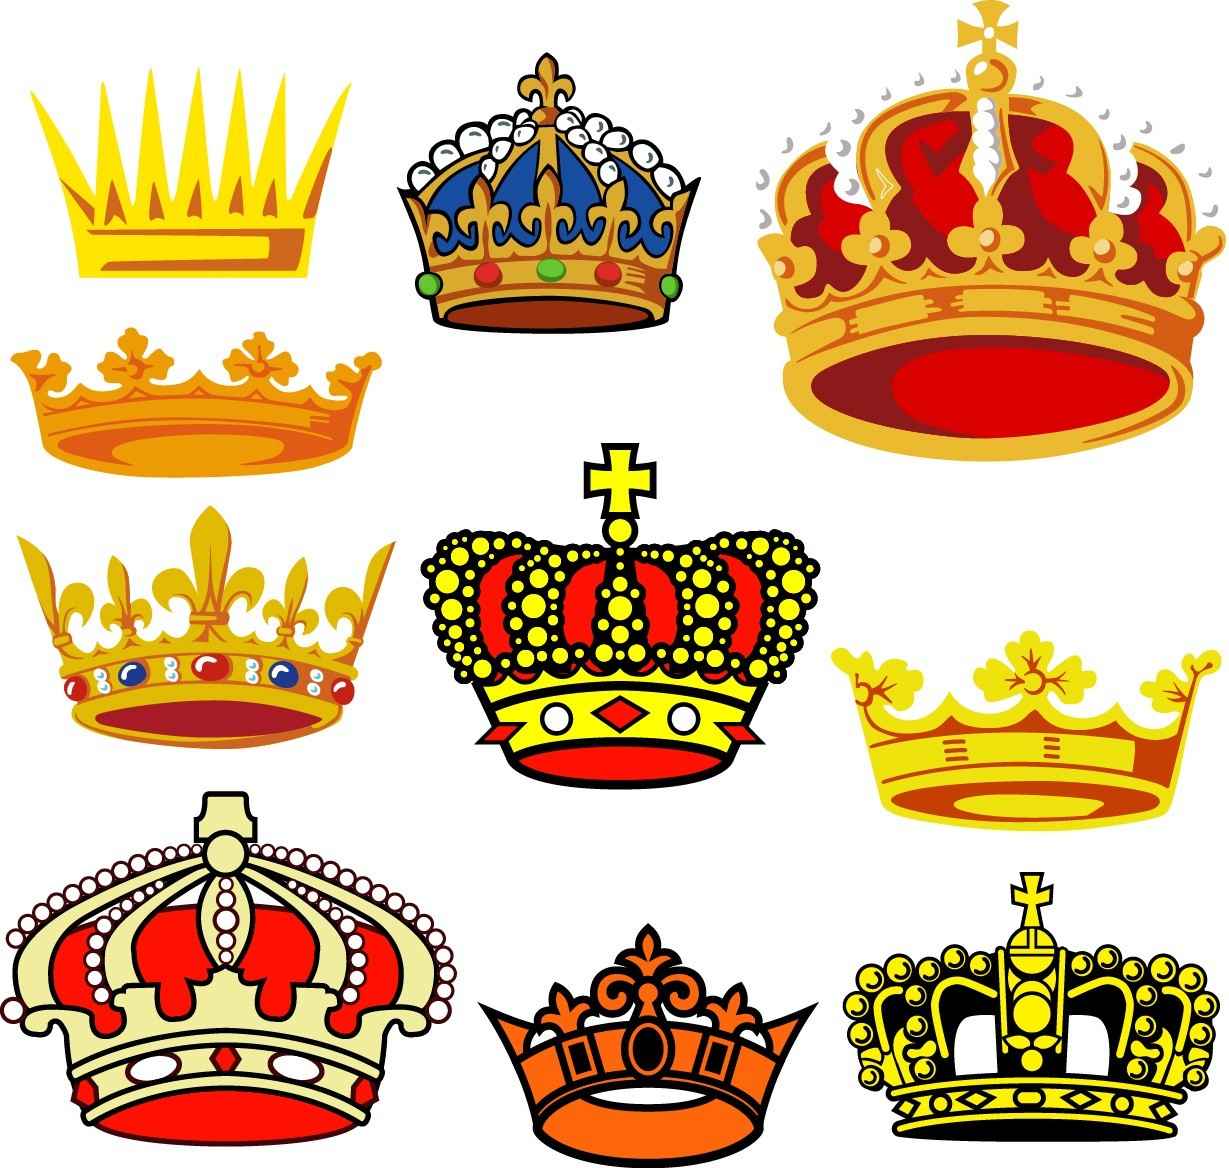 Crowns silhouette png